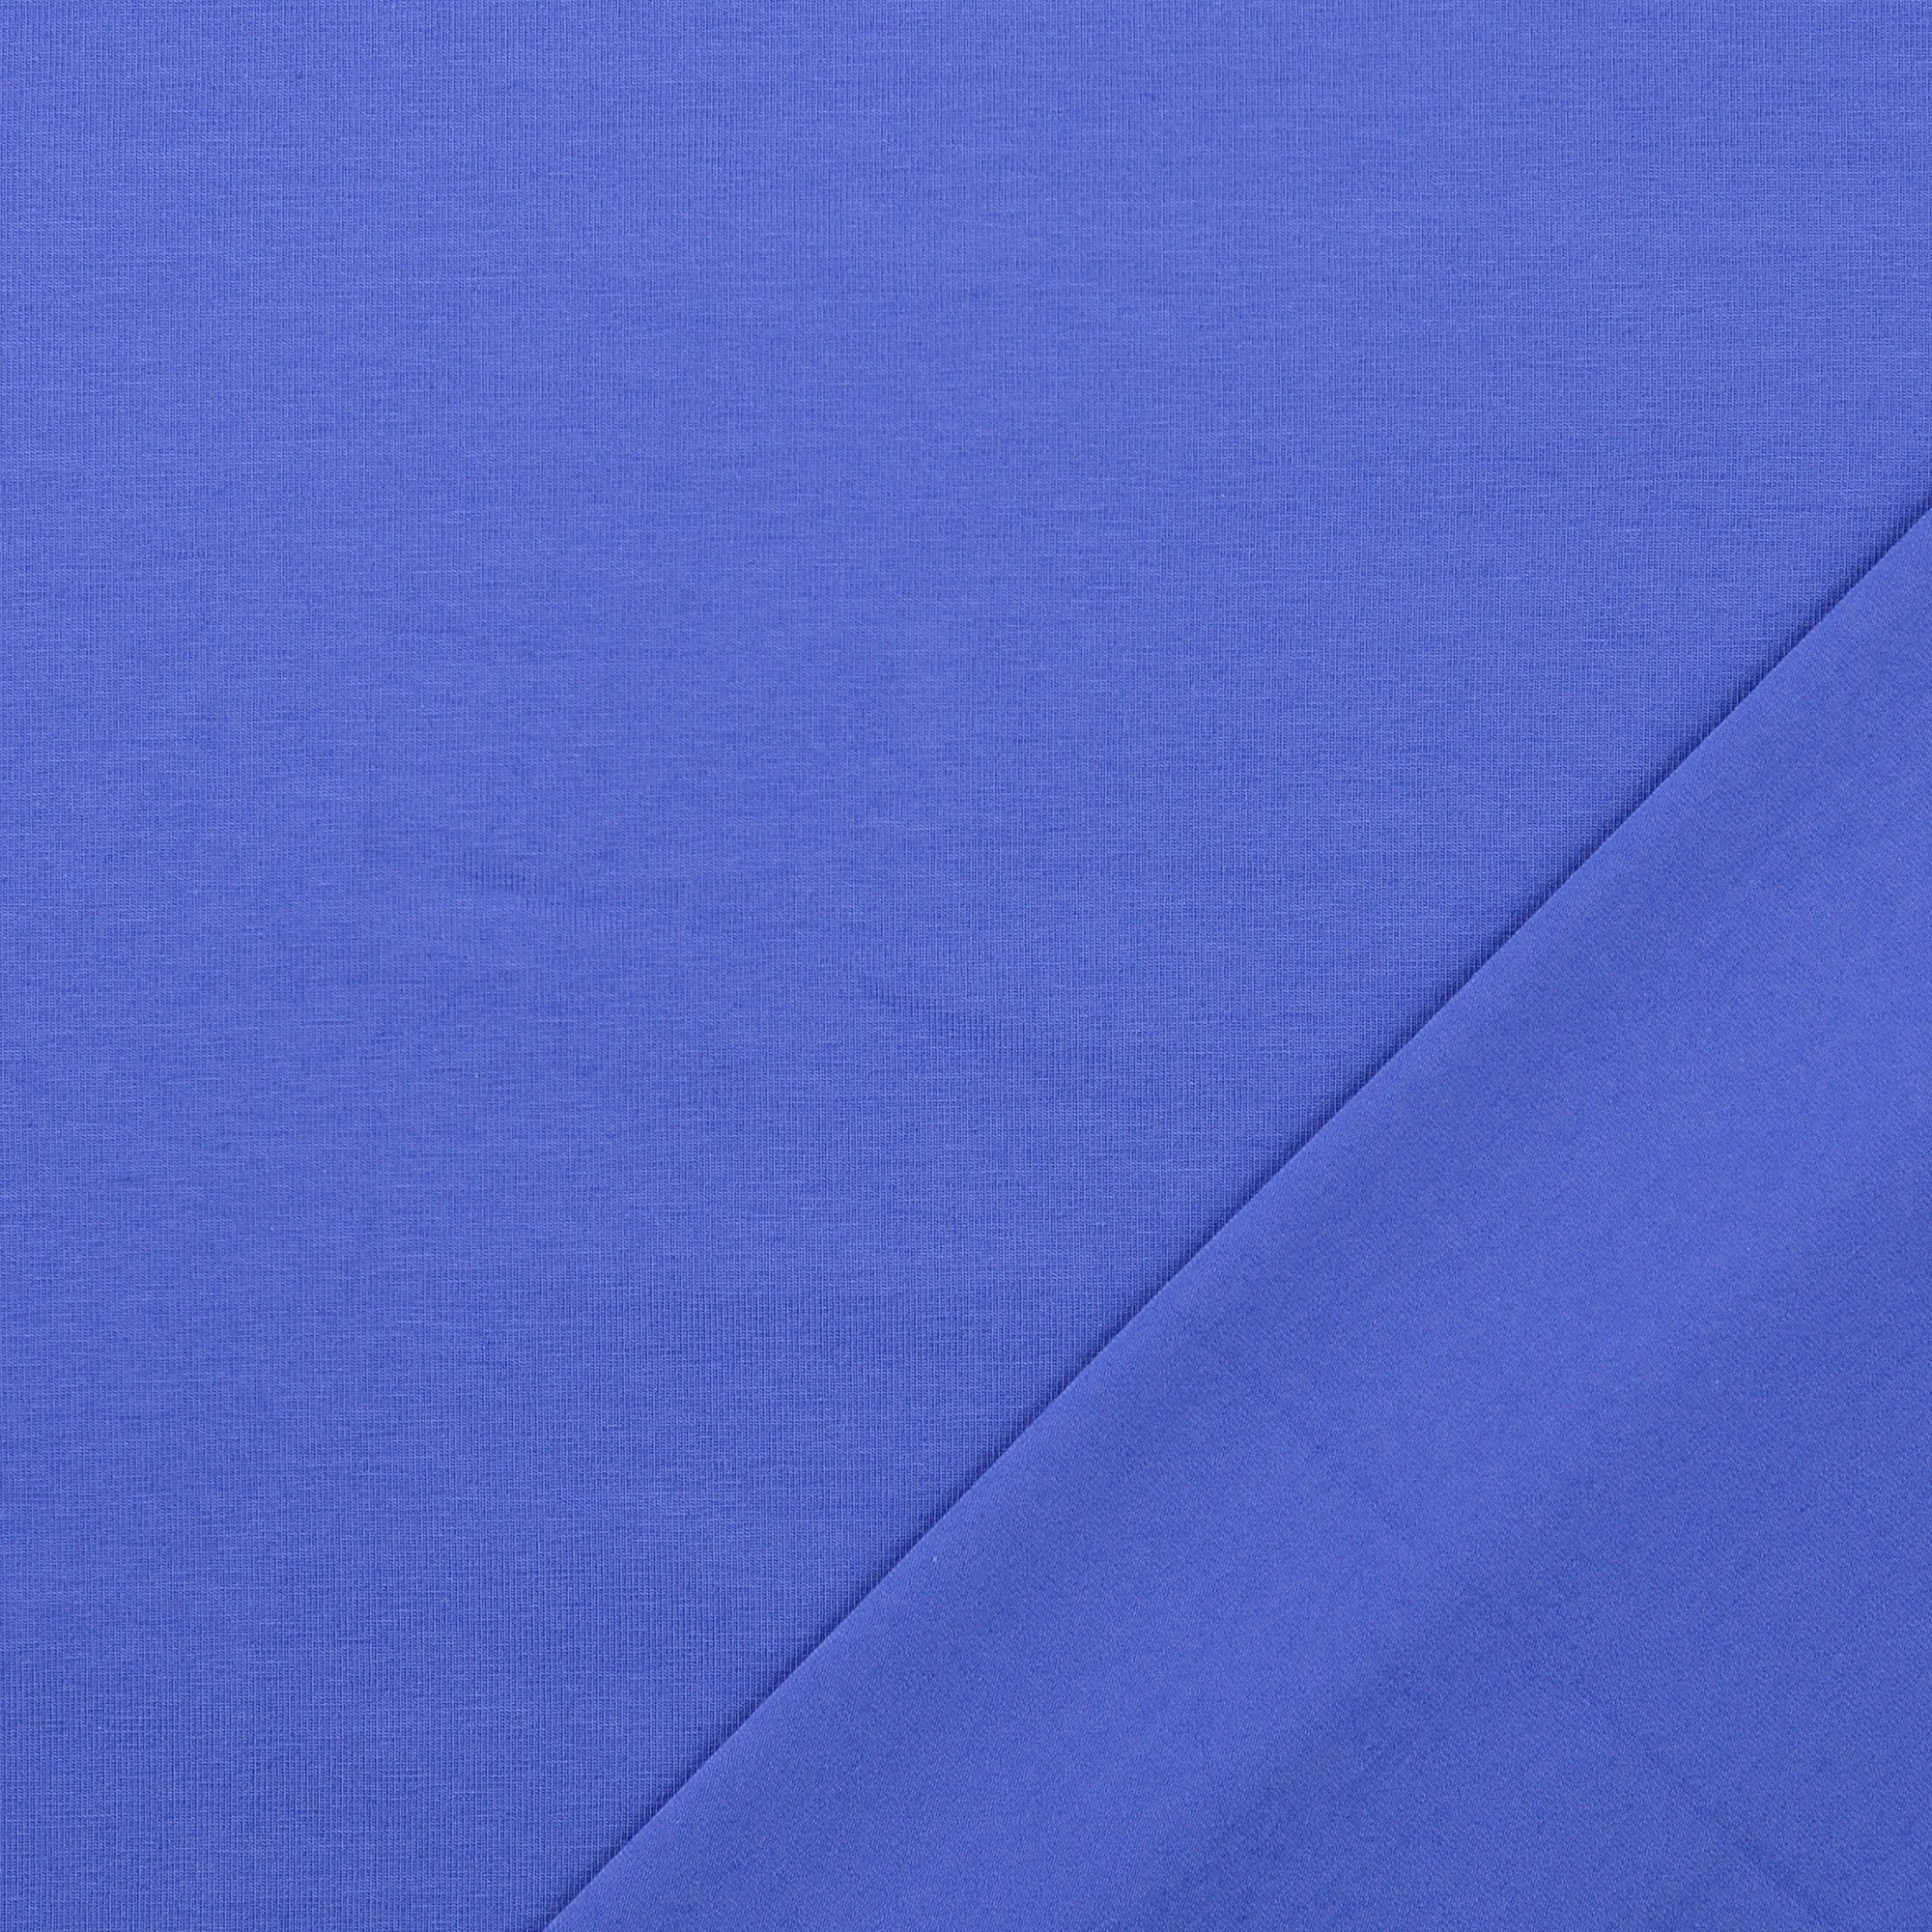 Essential Chic Nautical Blue Cotton Jersey Fabric